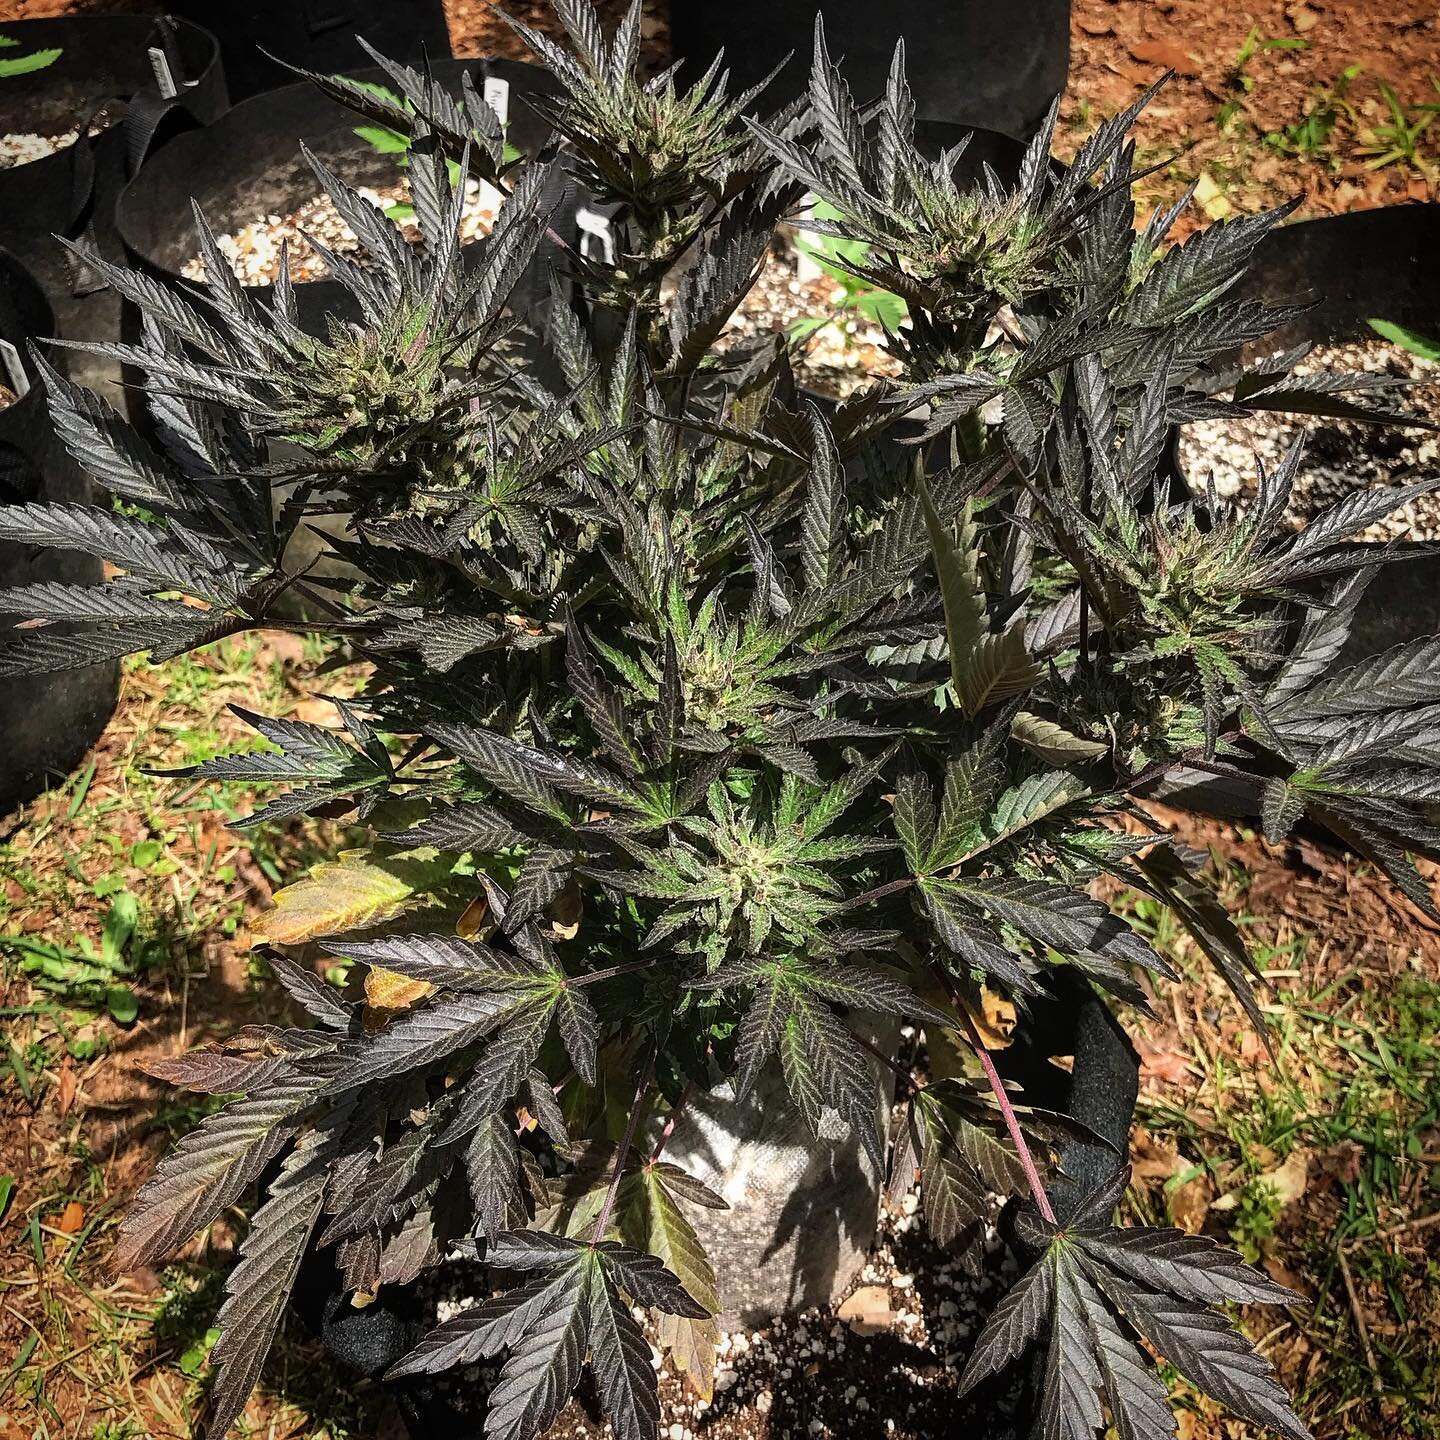 Happy Sunday! Check out this black leafed Sour Perrozoso grown outside this Summer by a friend. She smelled like a chemy lemonade.
.
.
.
.
.
.
#autoflower #autoflowers #autoflowering #autoflowercommunity #autoflowerseeds #feminizedseeds #autofem #rud